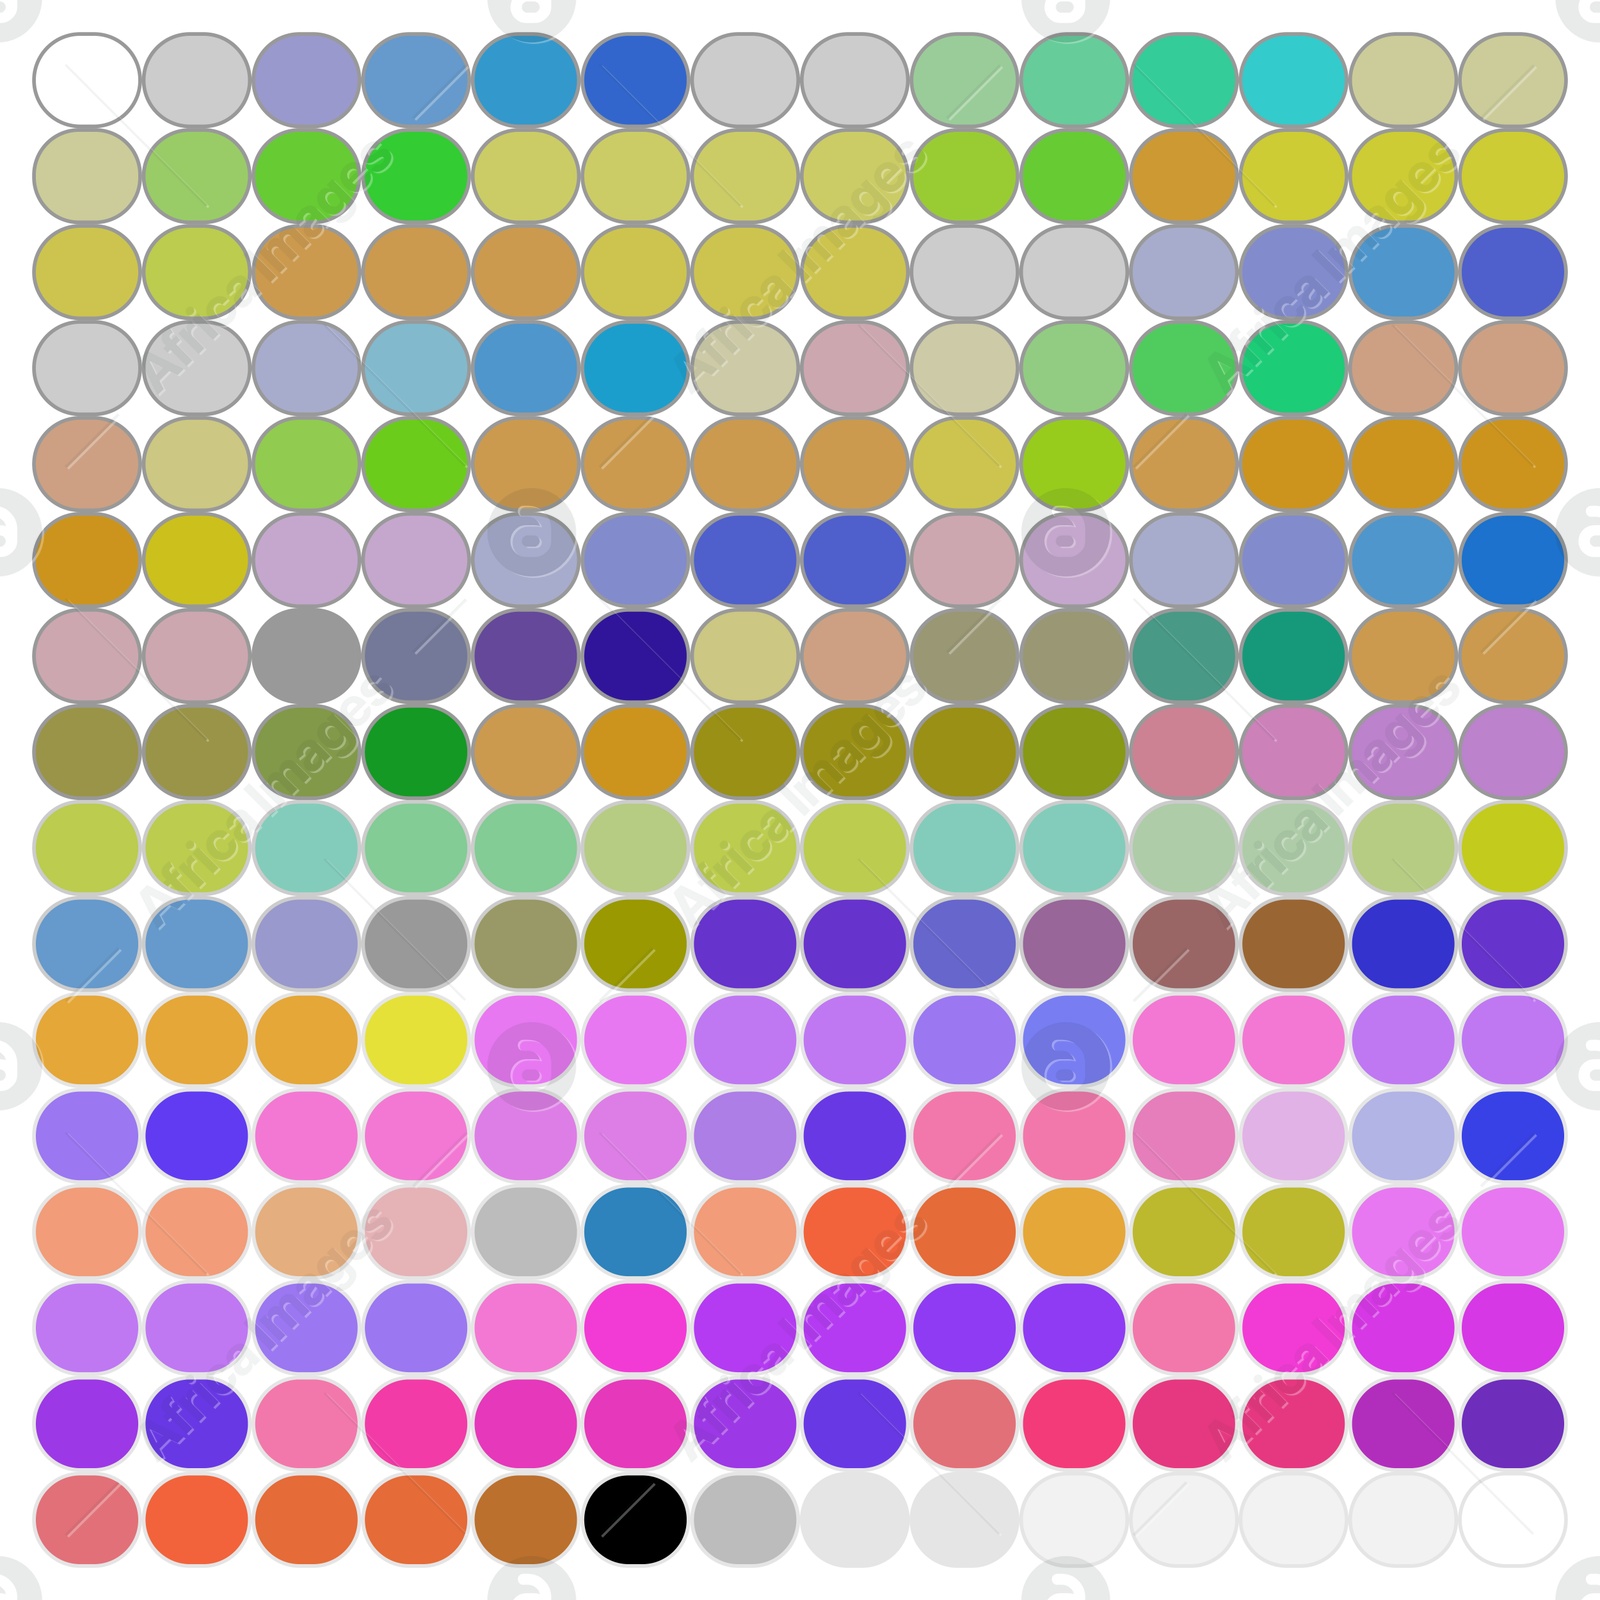 Illustration of Color palette with samples of different hues on white background